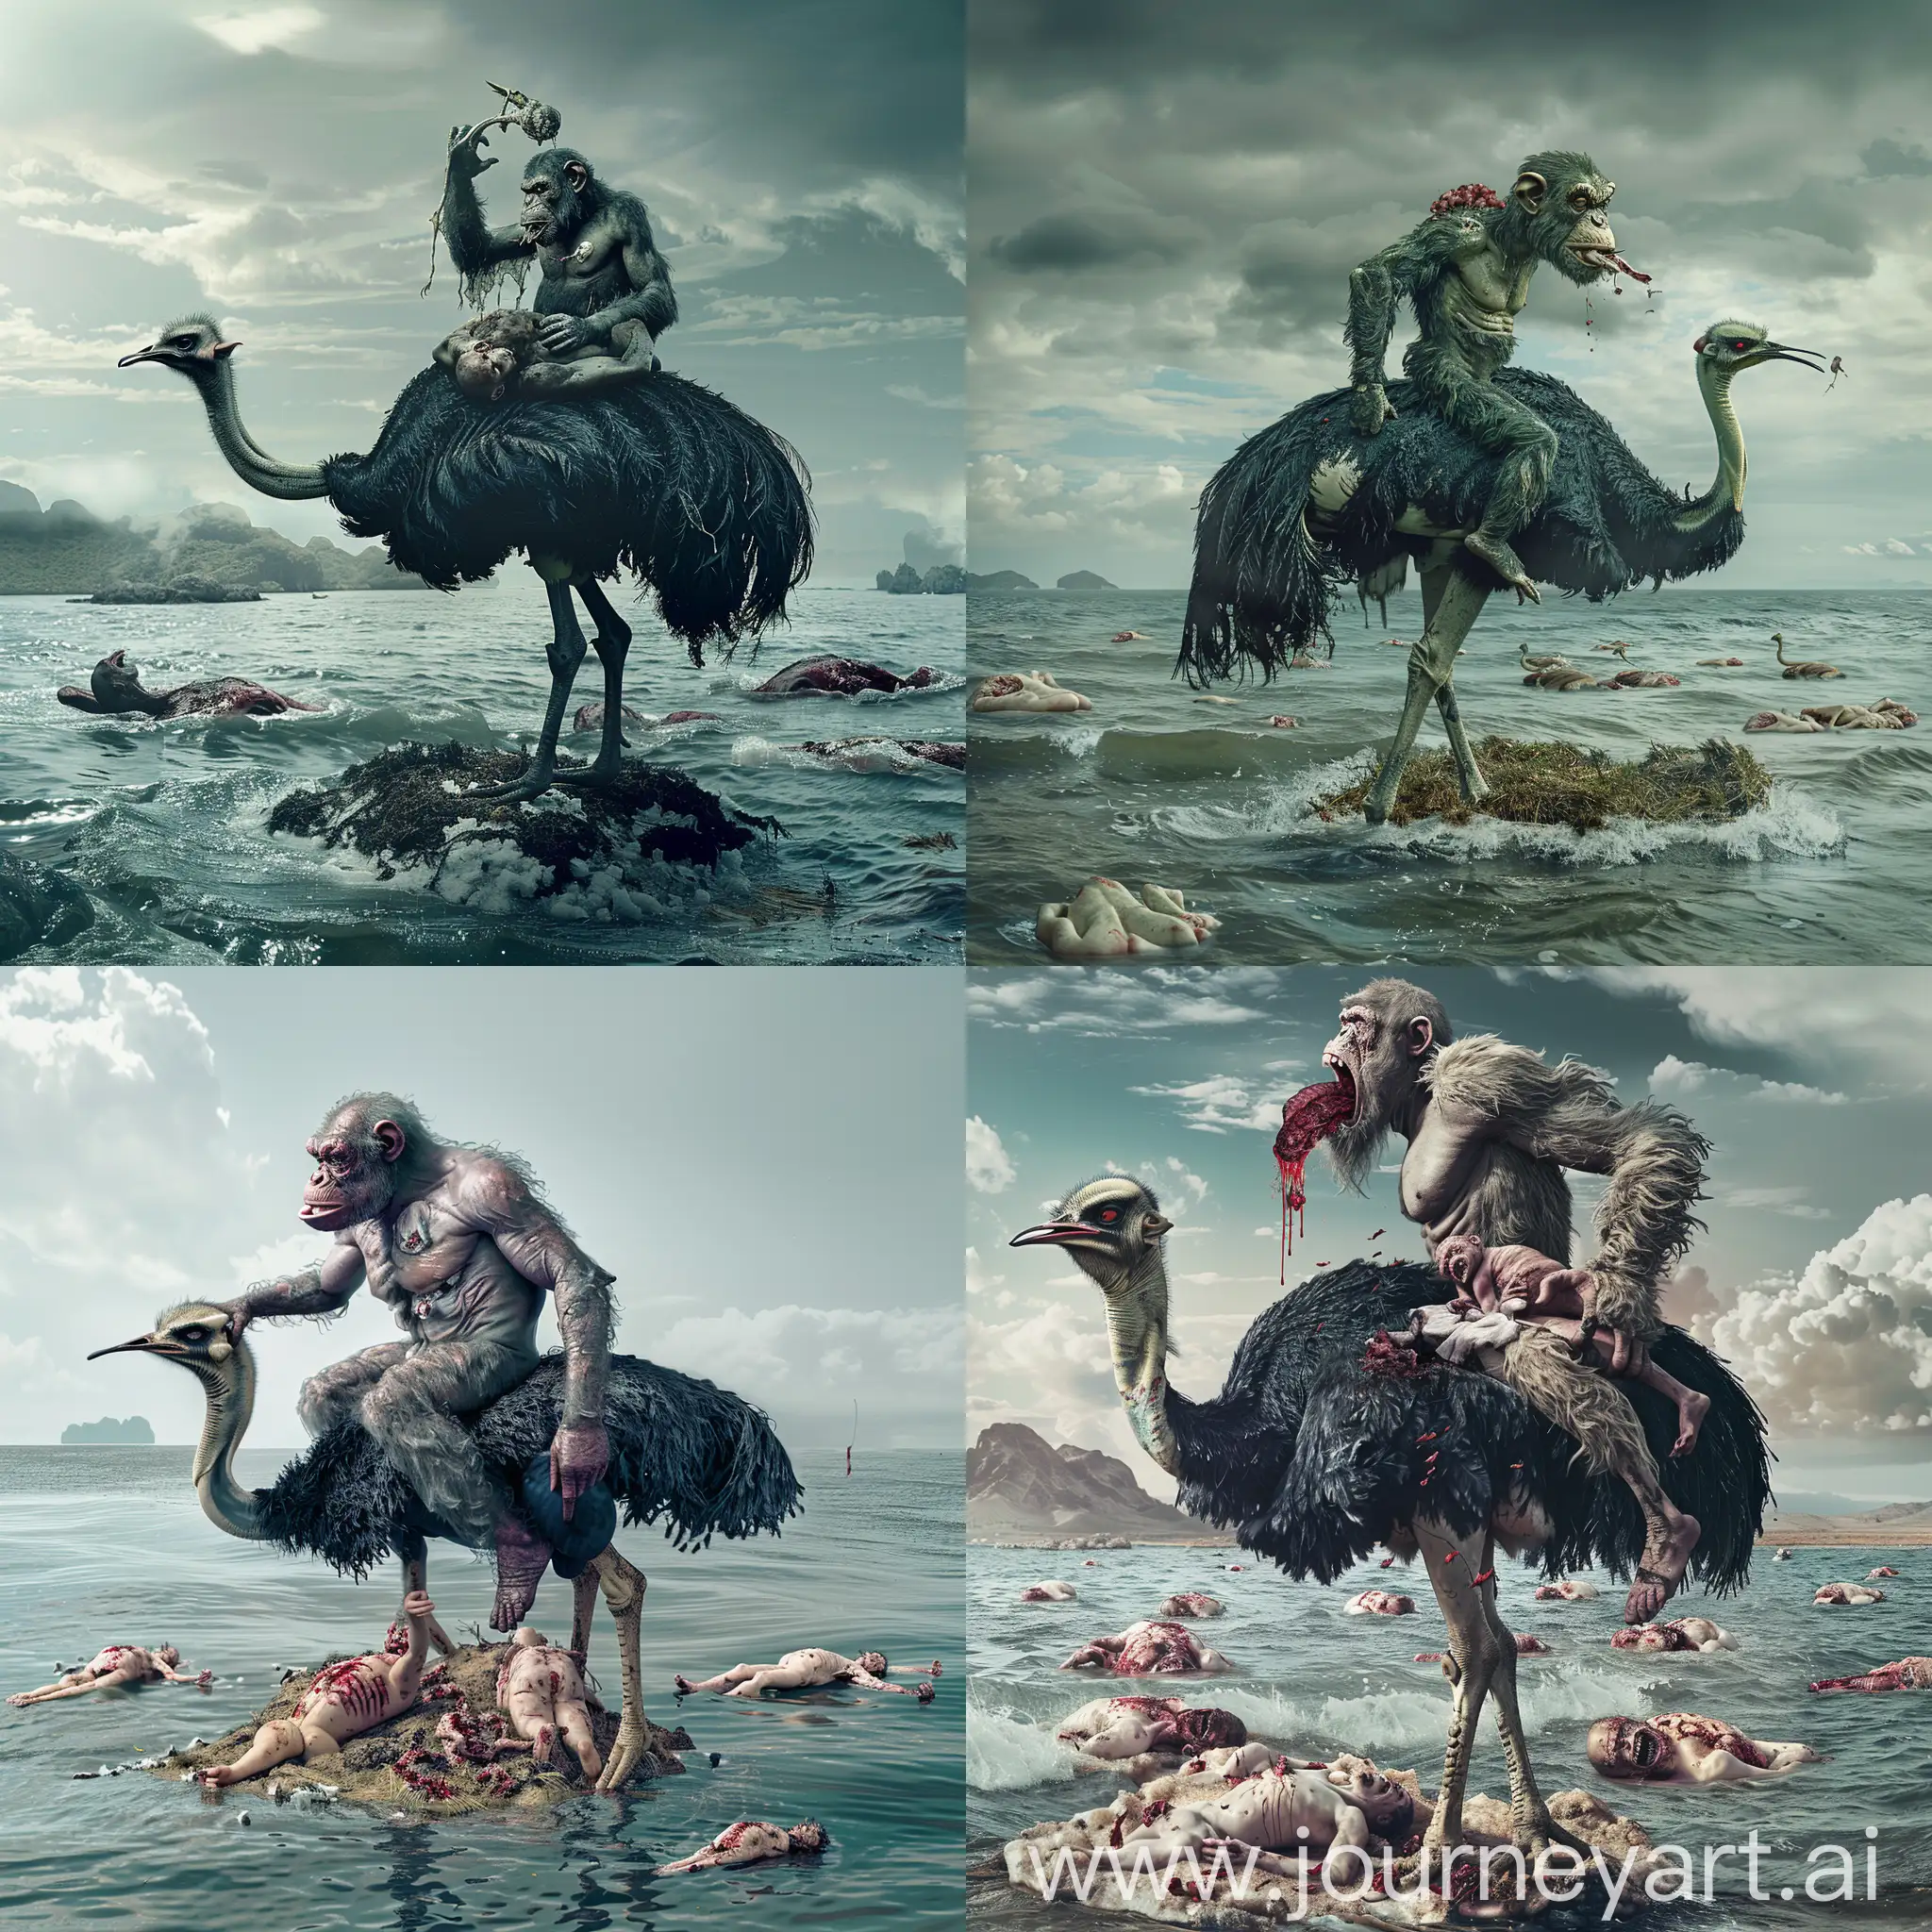 ManApe-Hybrid-Ostrich-Rider-Amidst-Human-Remains-in-a-Seabound-Island